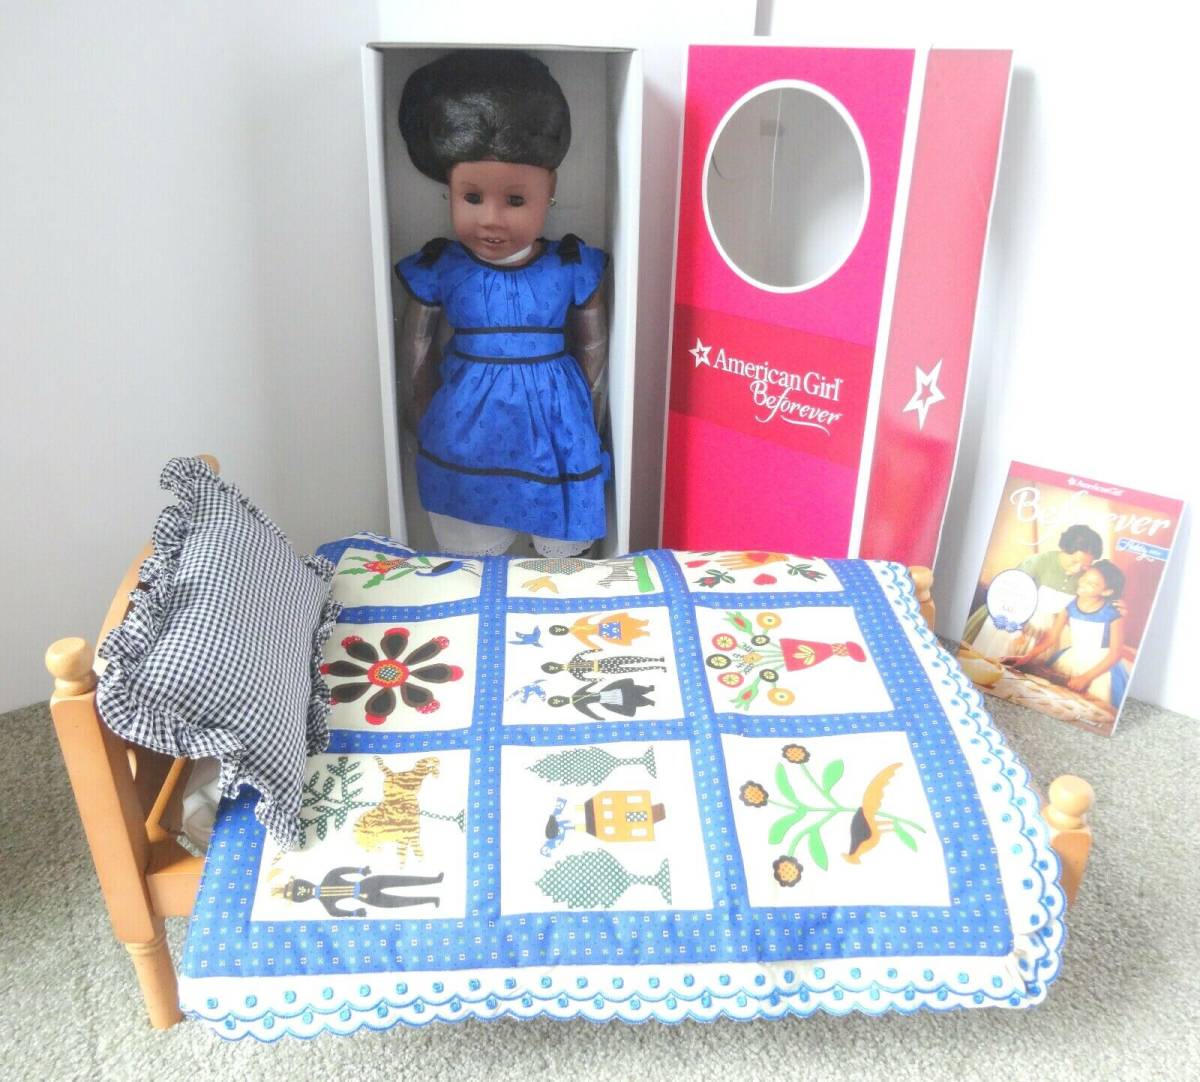 American Girl ADDY BEFOREVER 18" DOLL & Retired BED & BEDDING - Furniture - New 海外 即決